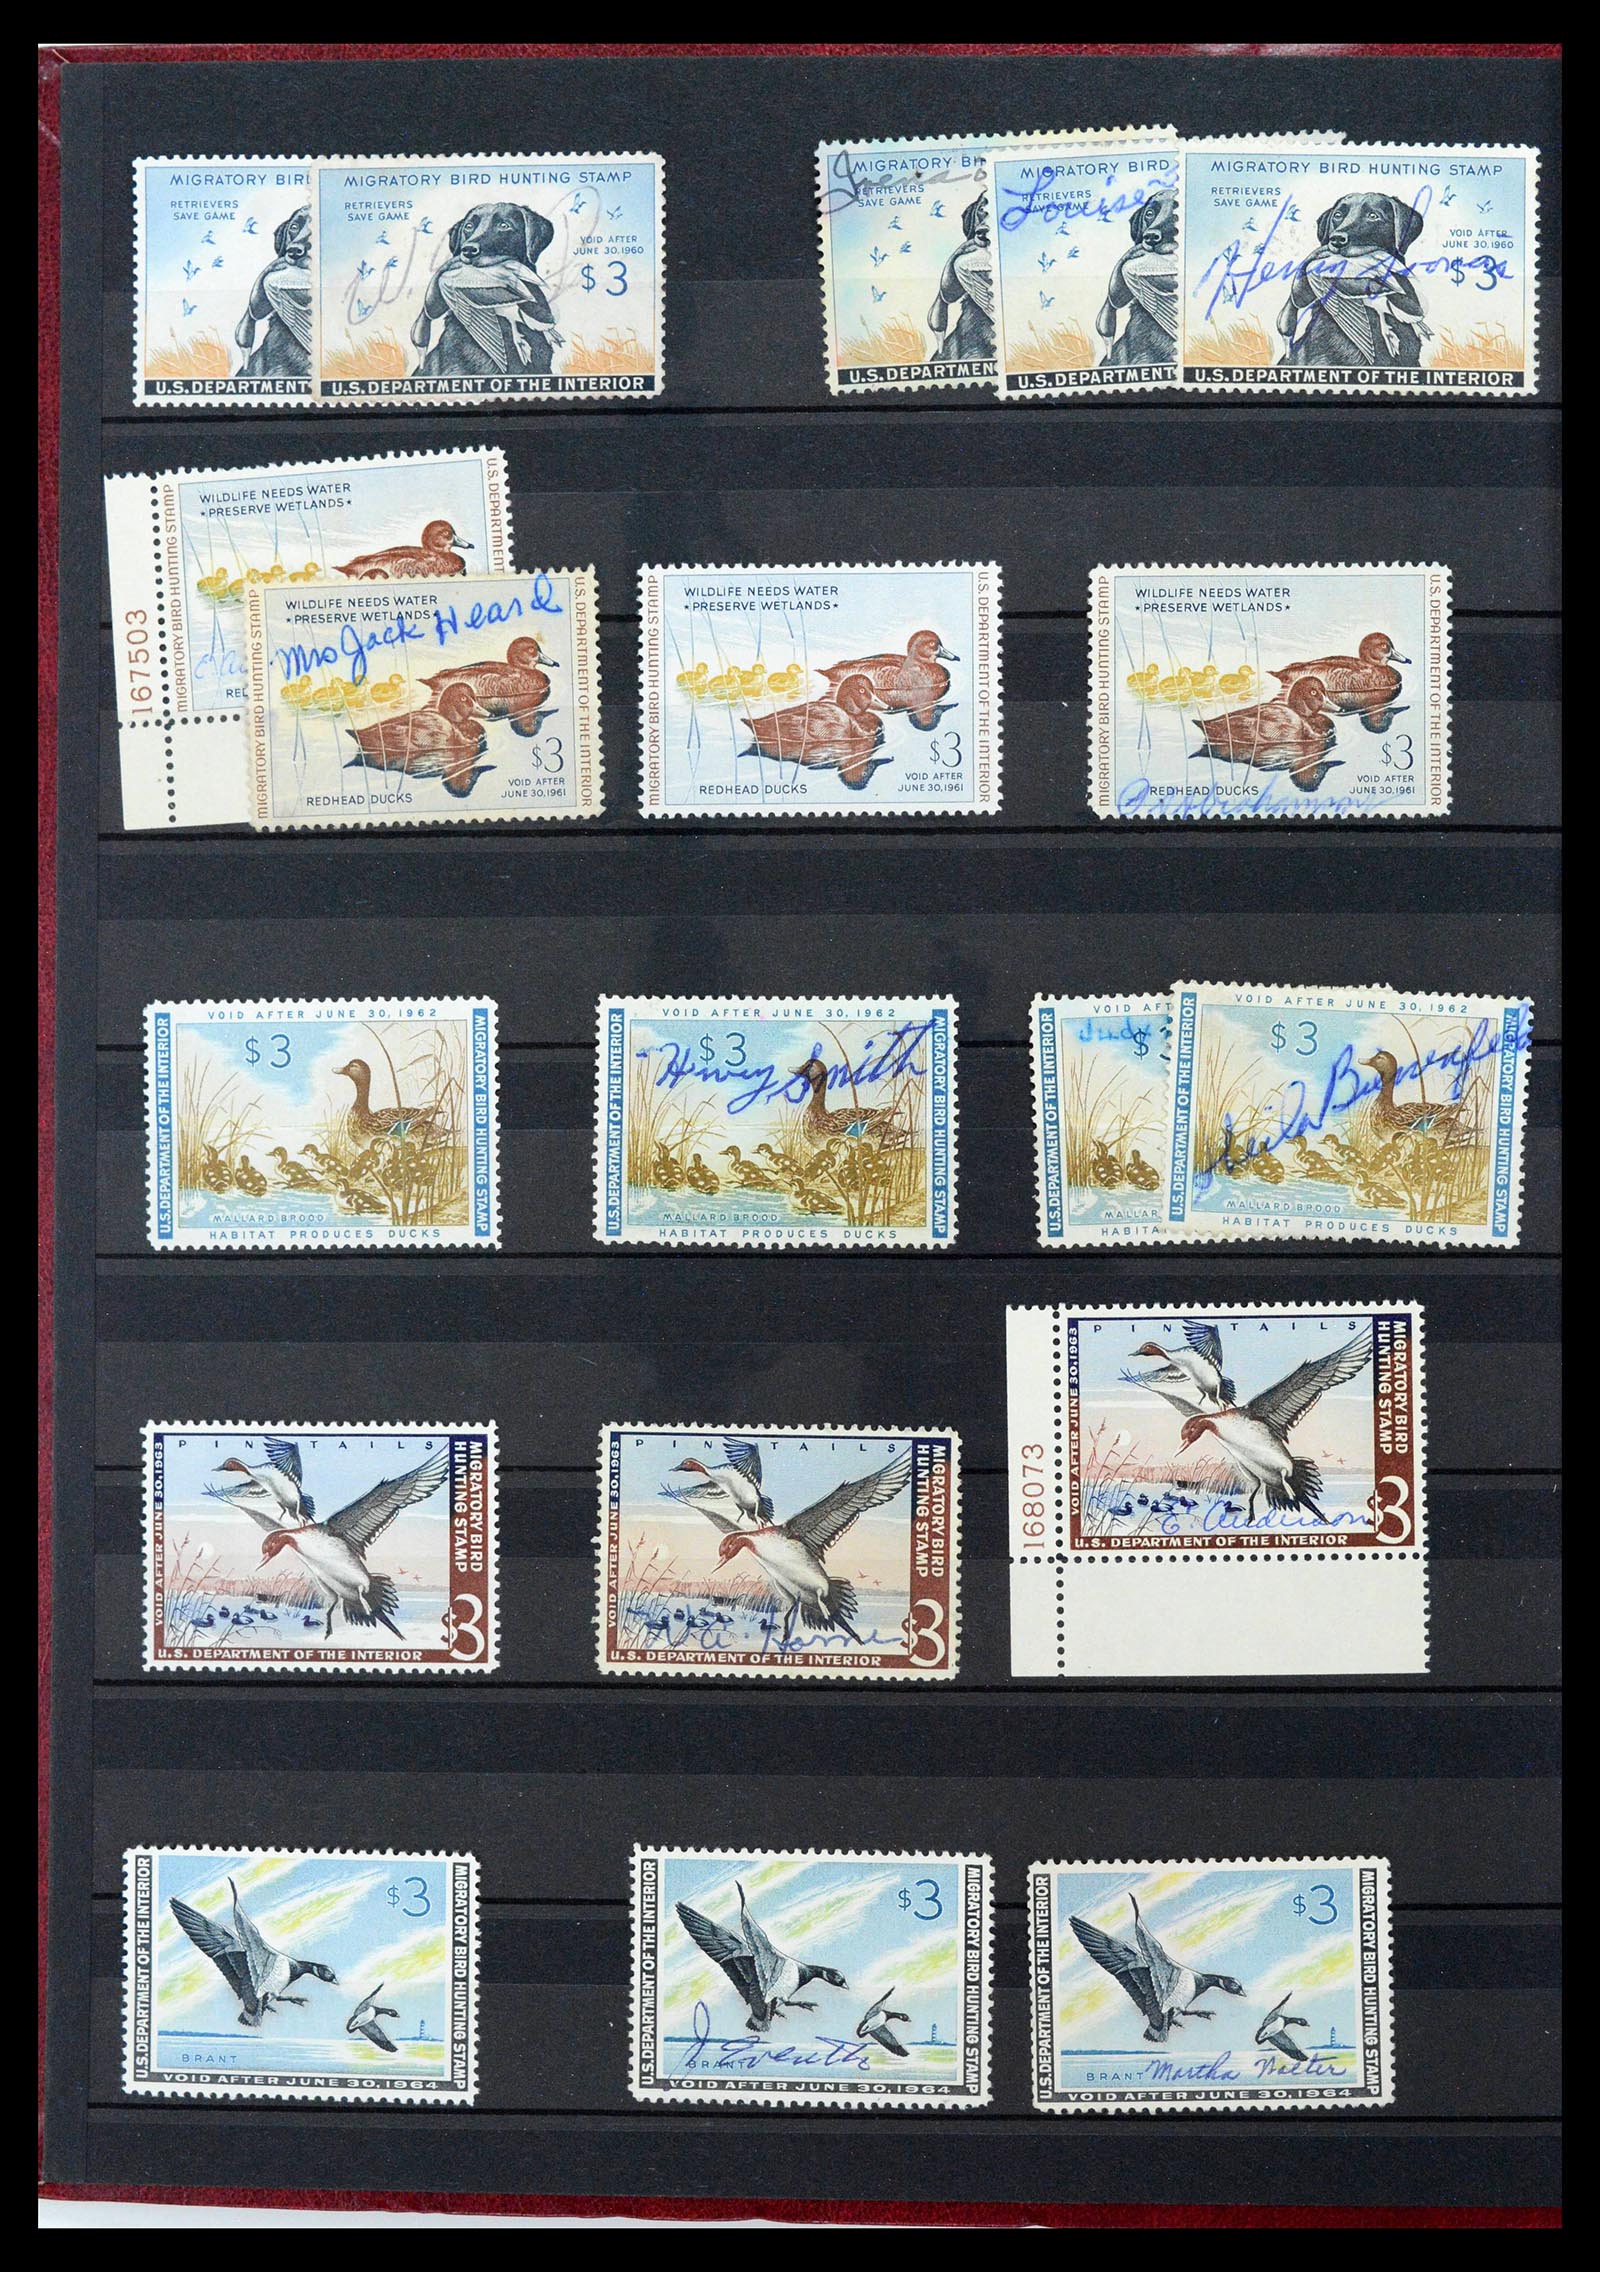 39426 0006 - Stamp collection 39426 USA duckstamps 1934-2007.